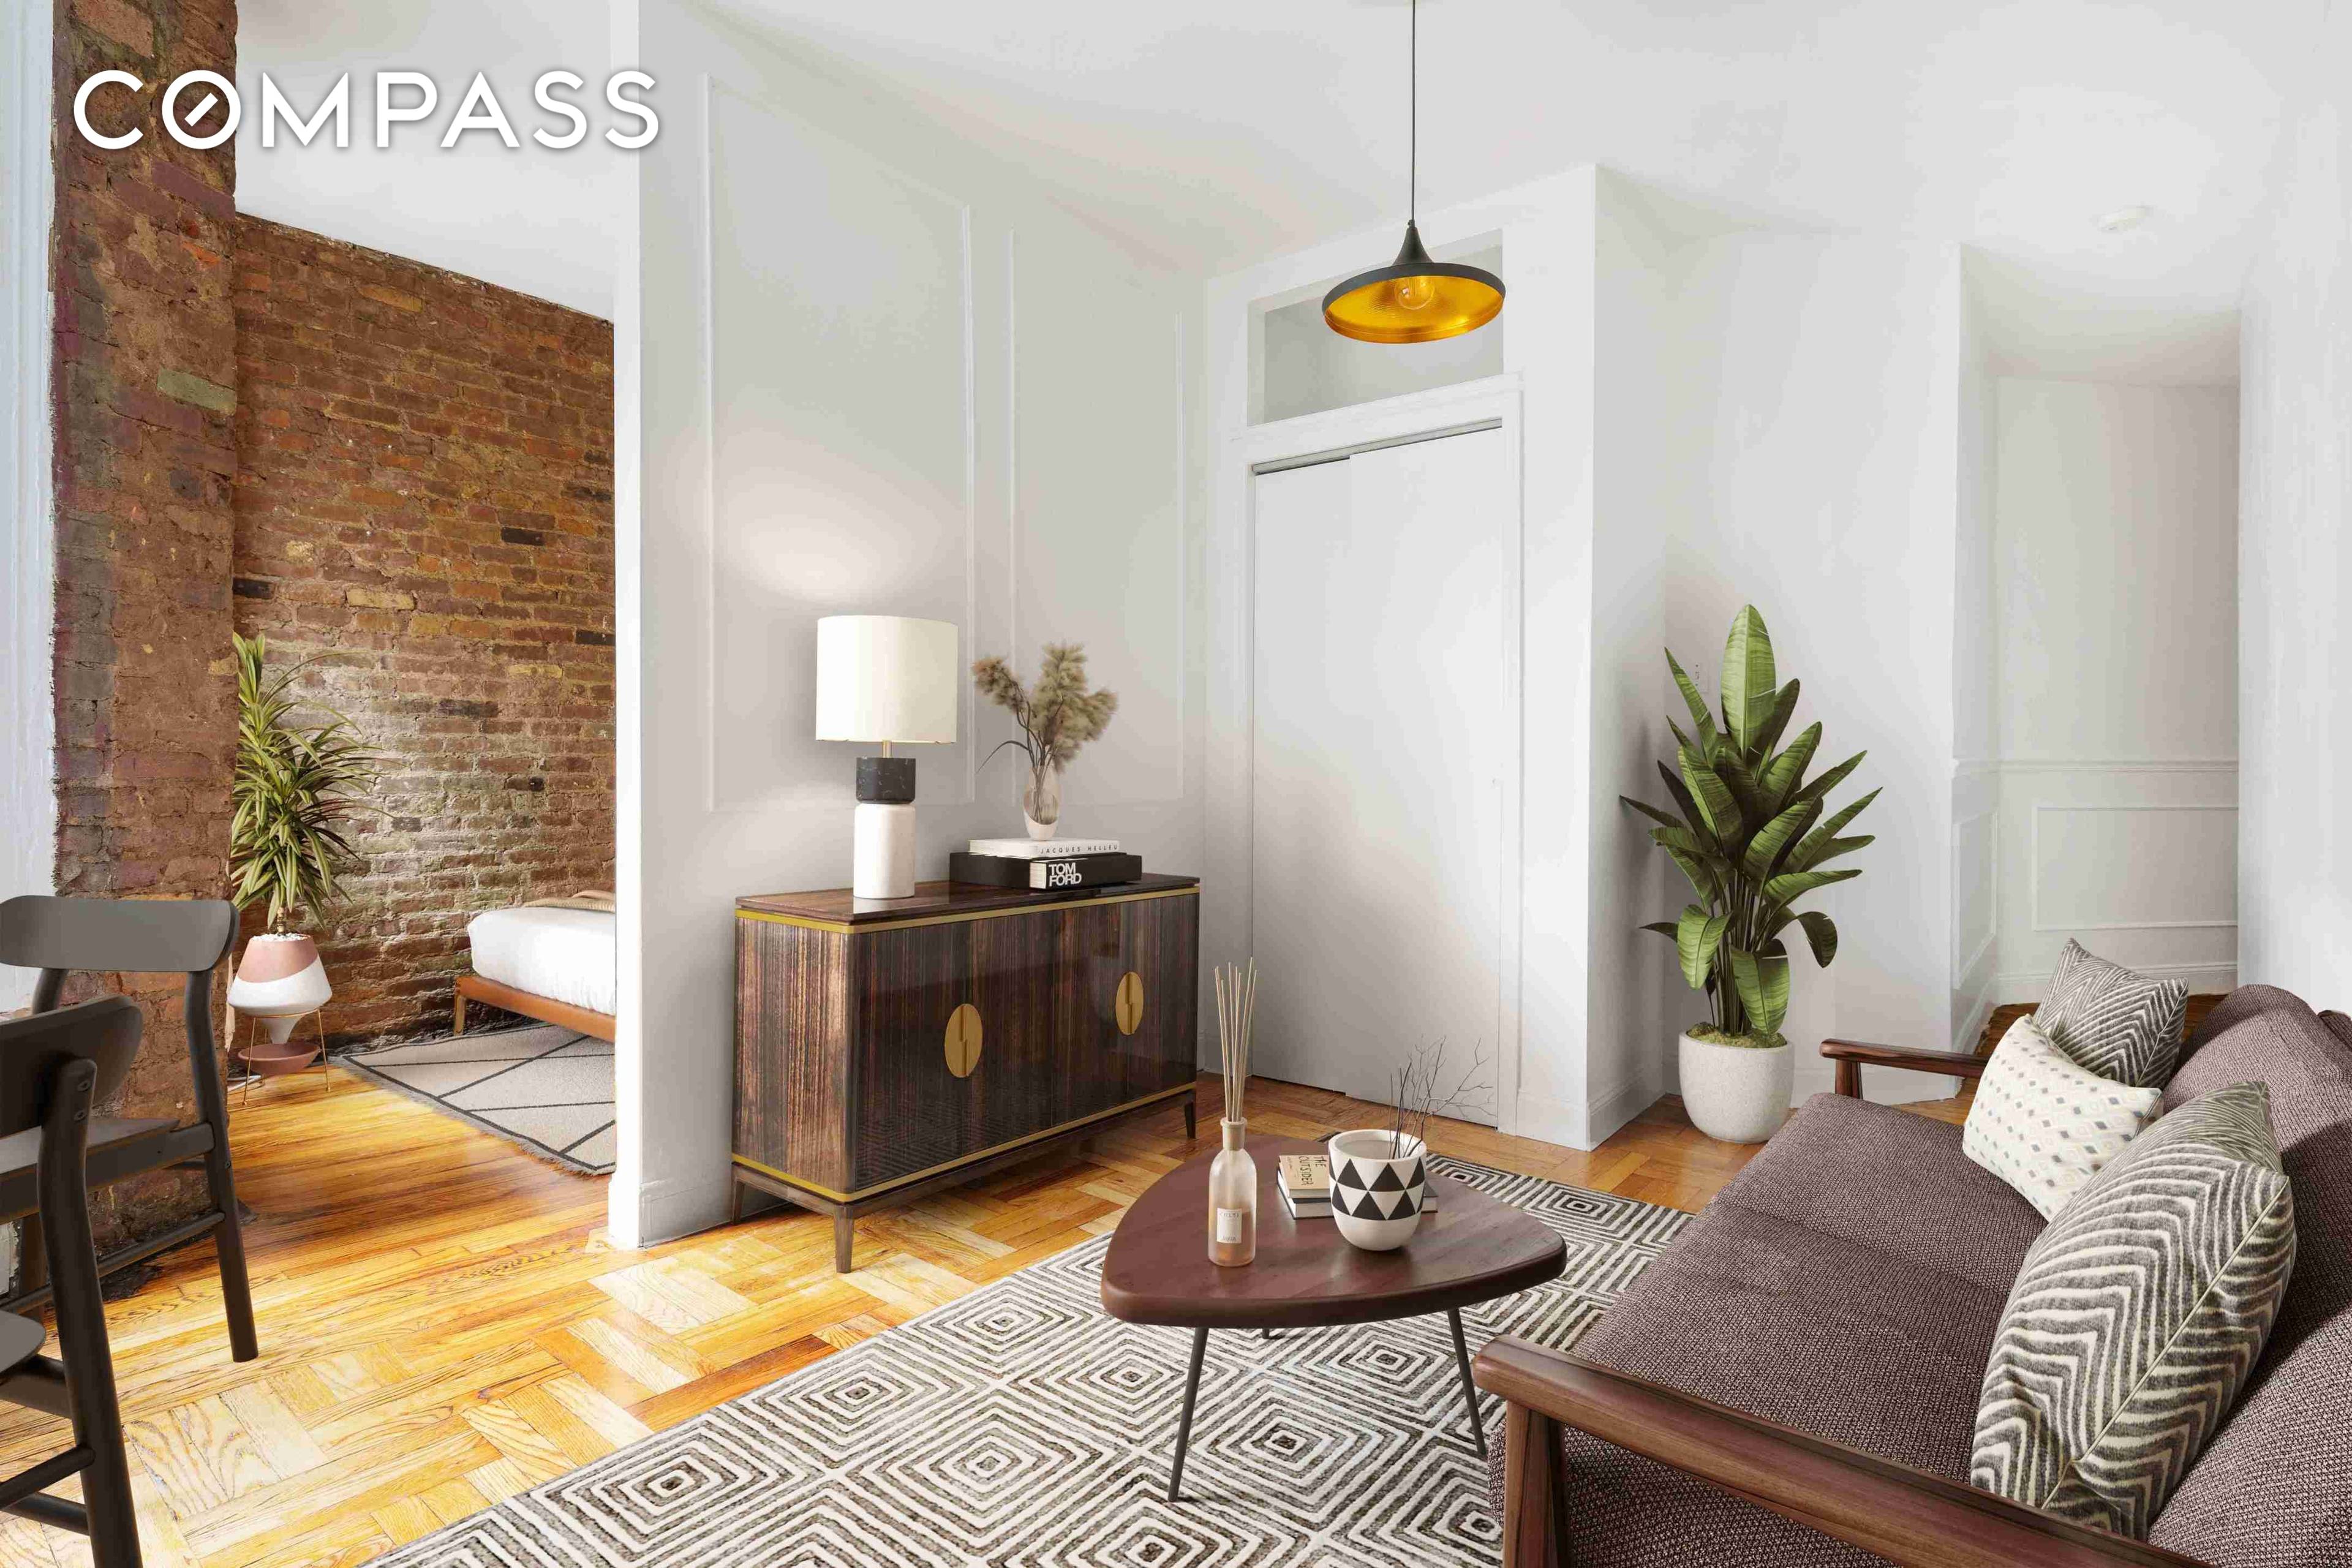 For the buyer who wants to be in the middle of it all, this bright, affordable coop in Greenwich Village is for you.